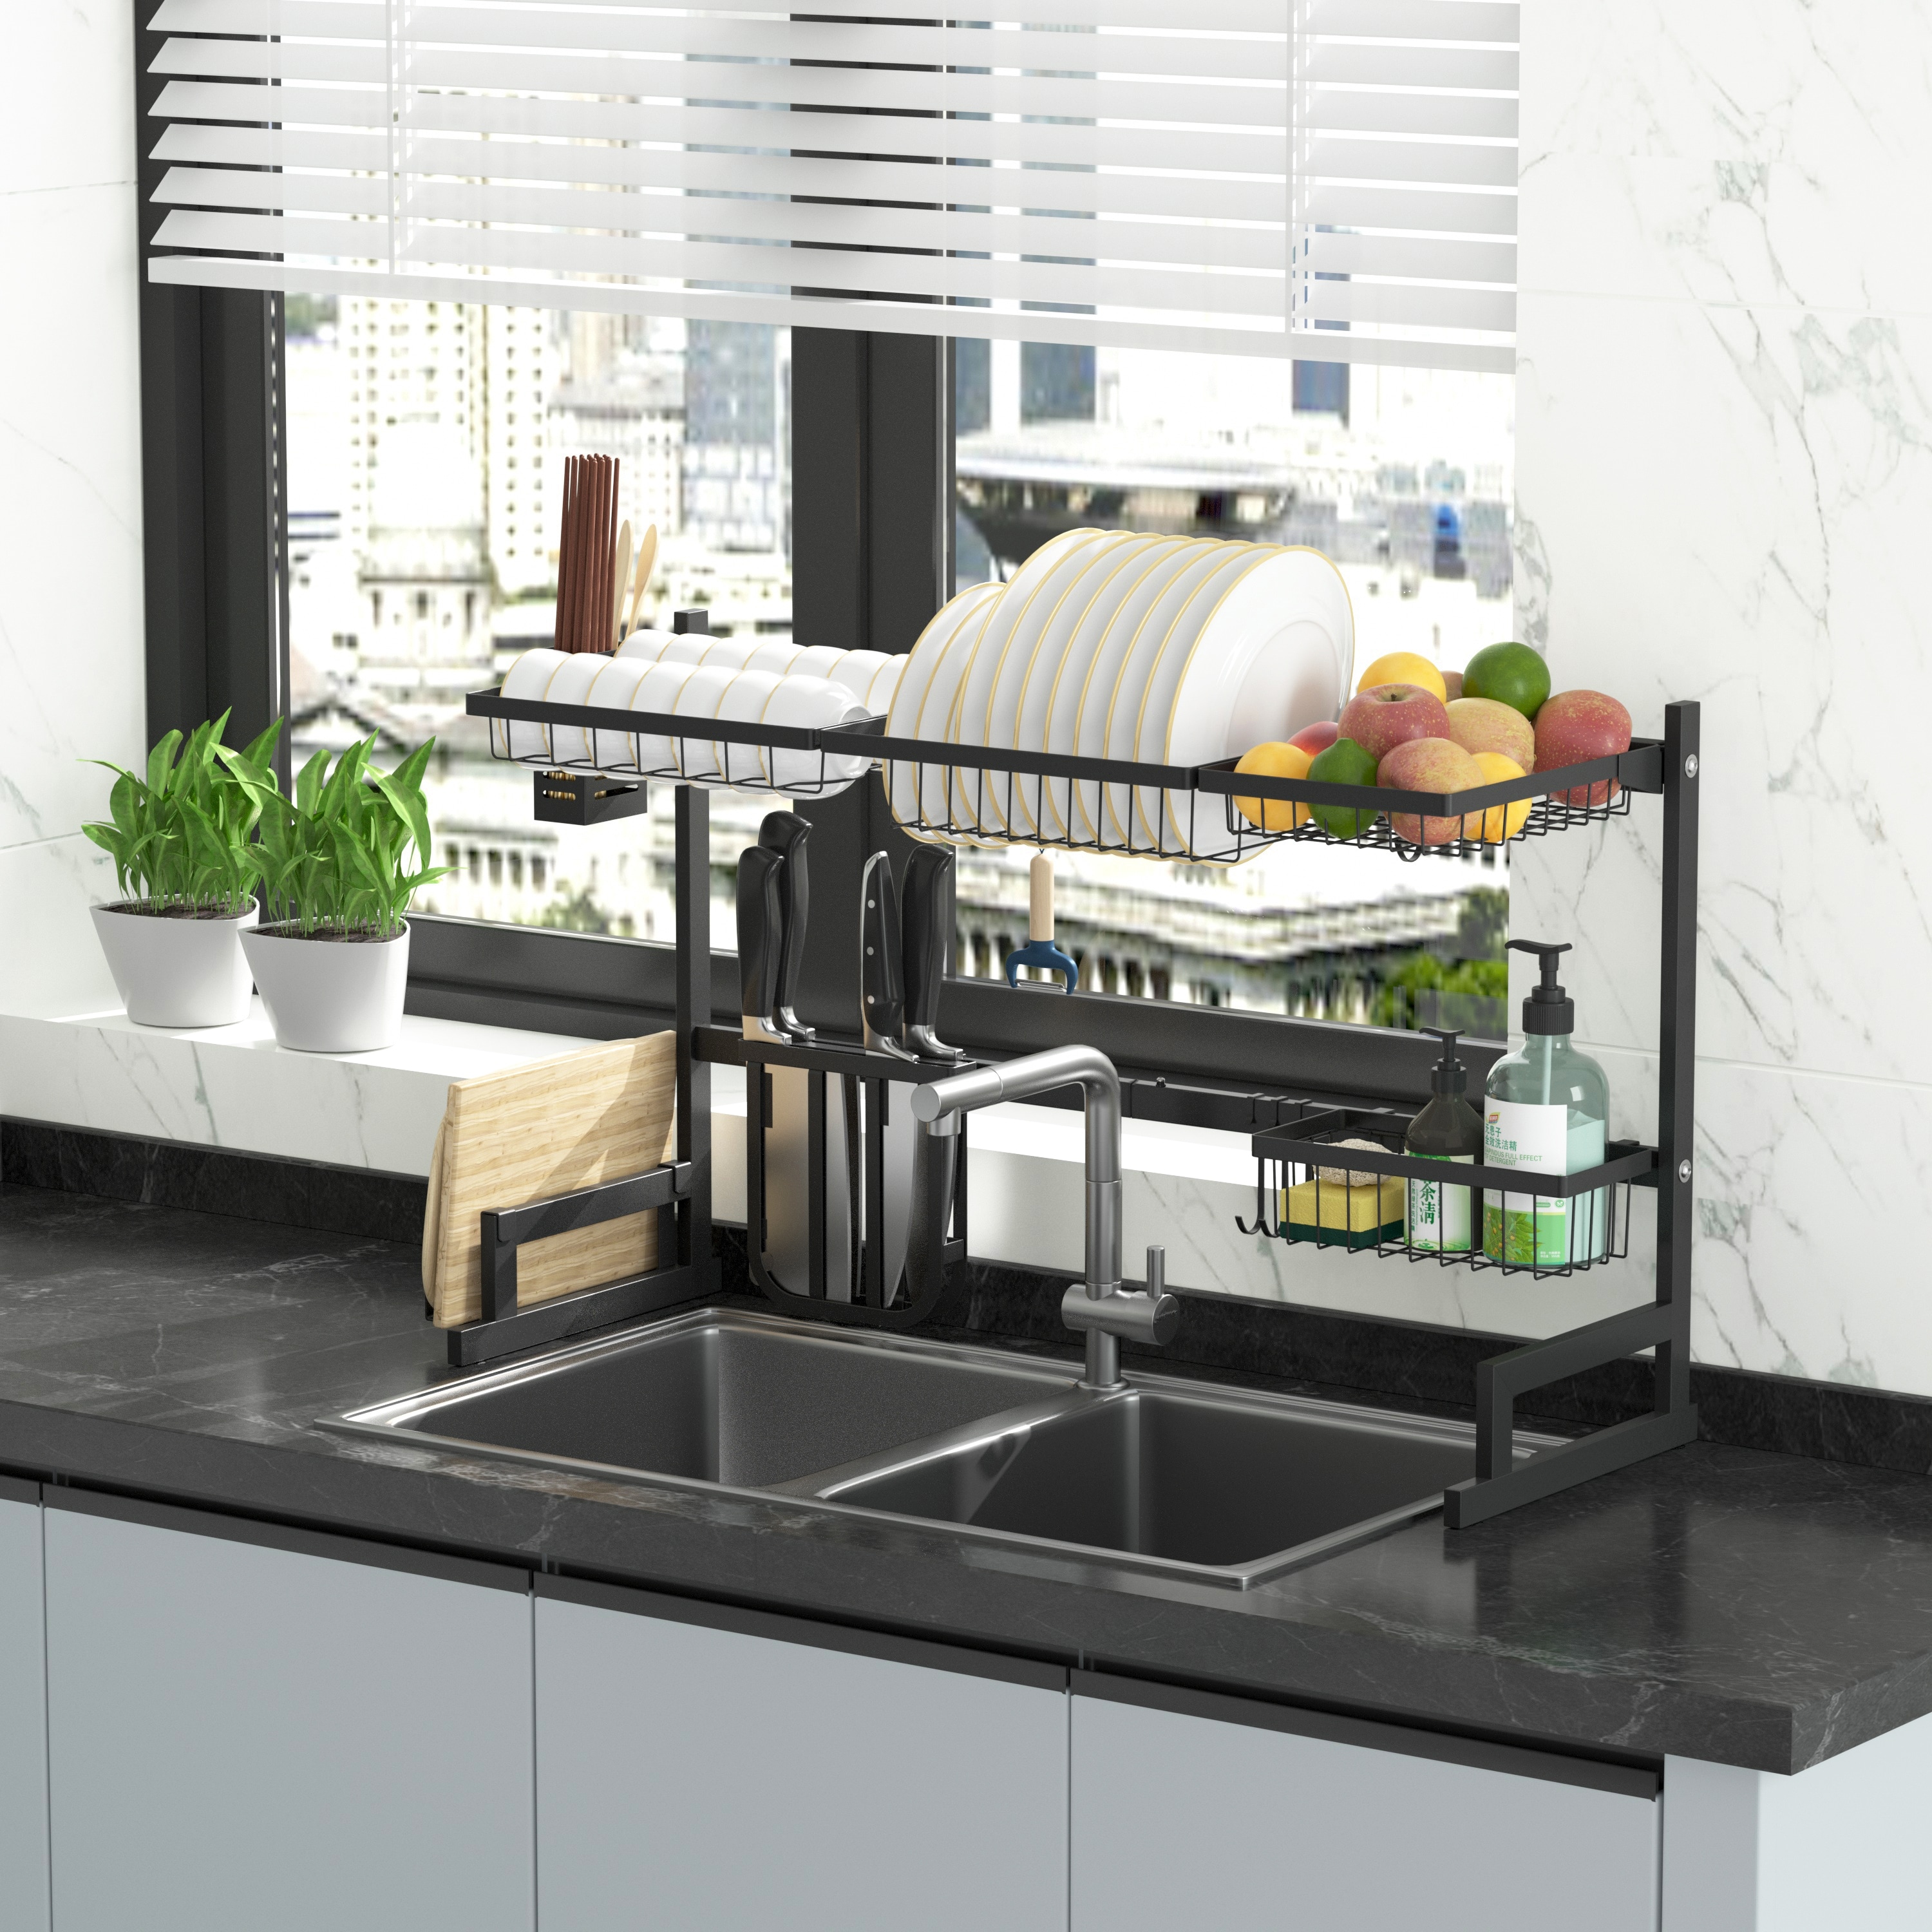 https://ak1.ostkcdn.com/images/products/is/images/direct/ff02a81bf03358b772b1d284591ef30b291c903f/Adjustable-Large-Dish-Drying-Rack-Metal-Over-the-Sink-Storage-Kitchen.jpg